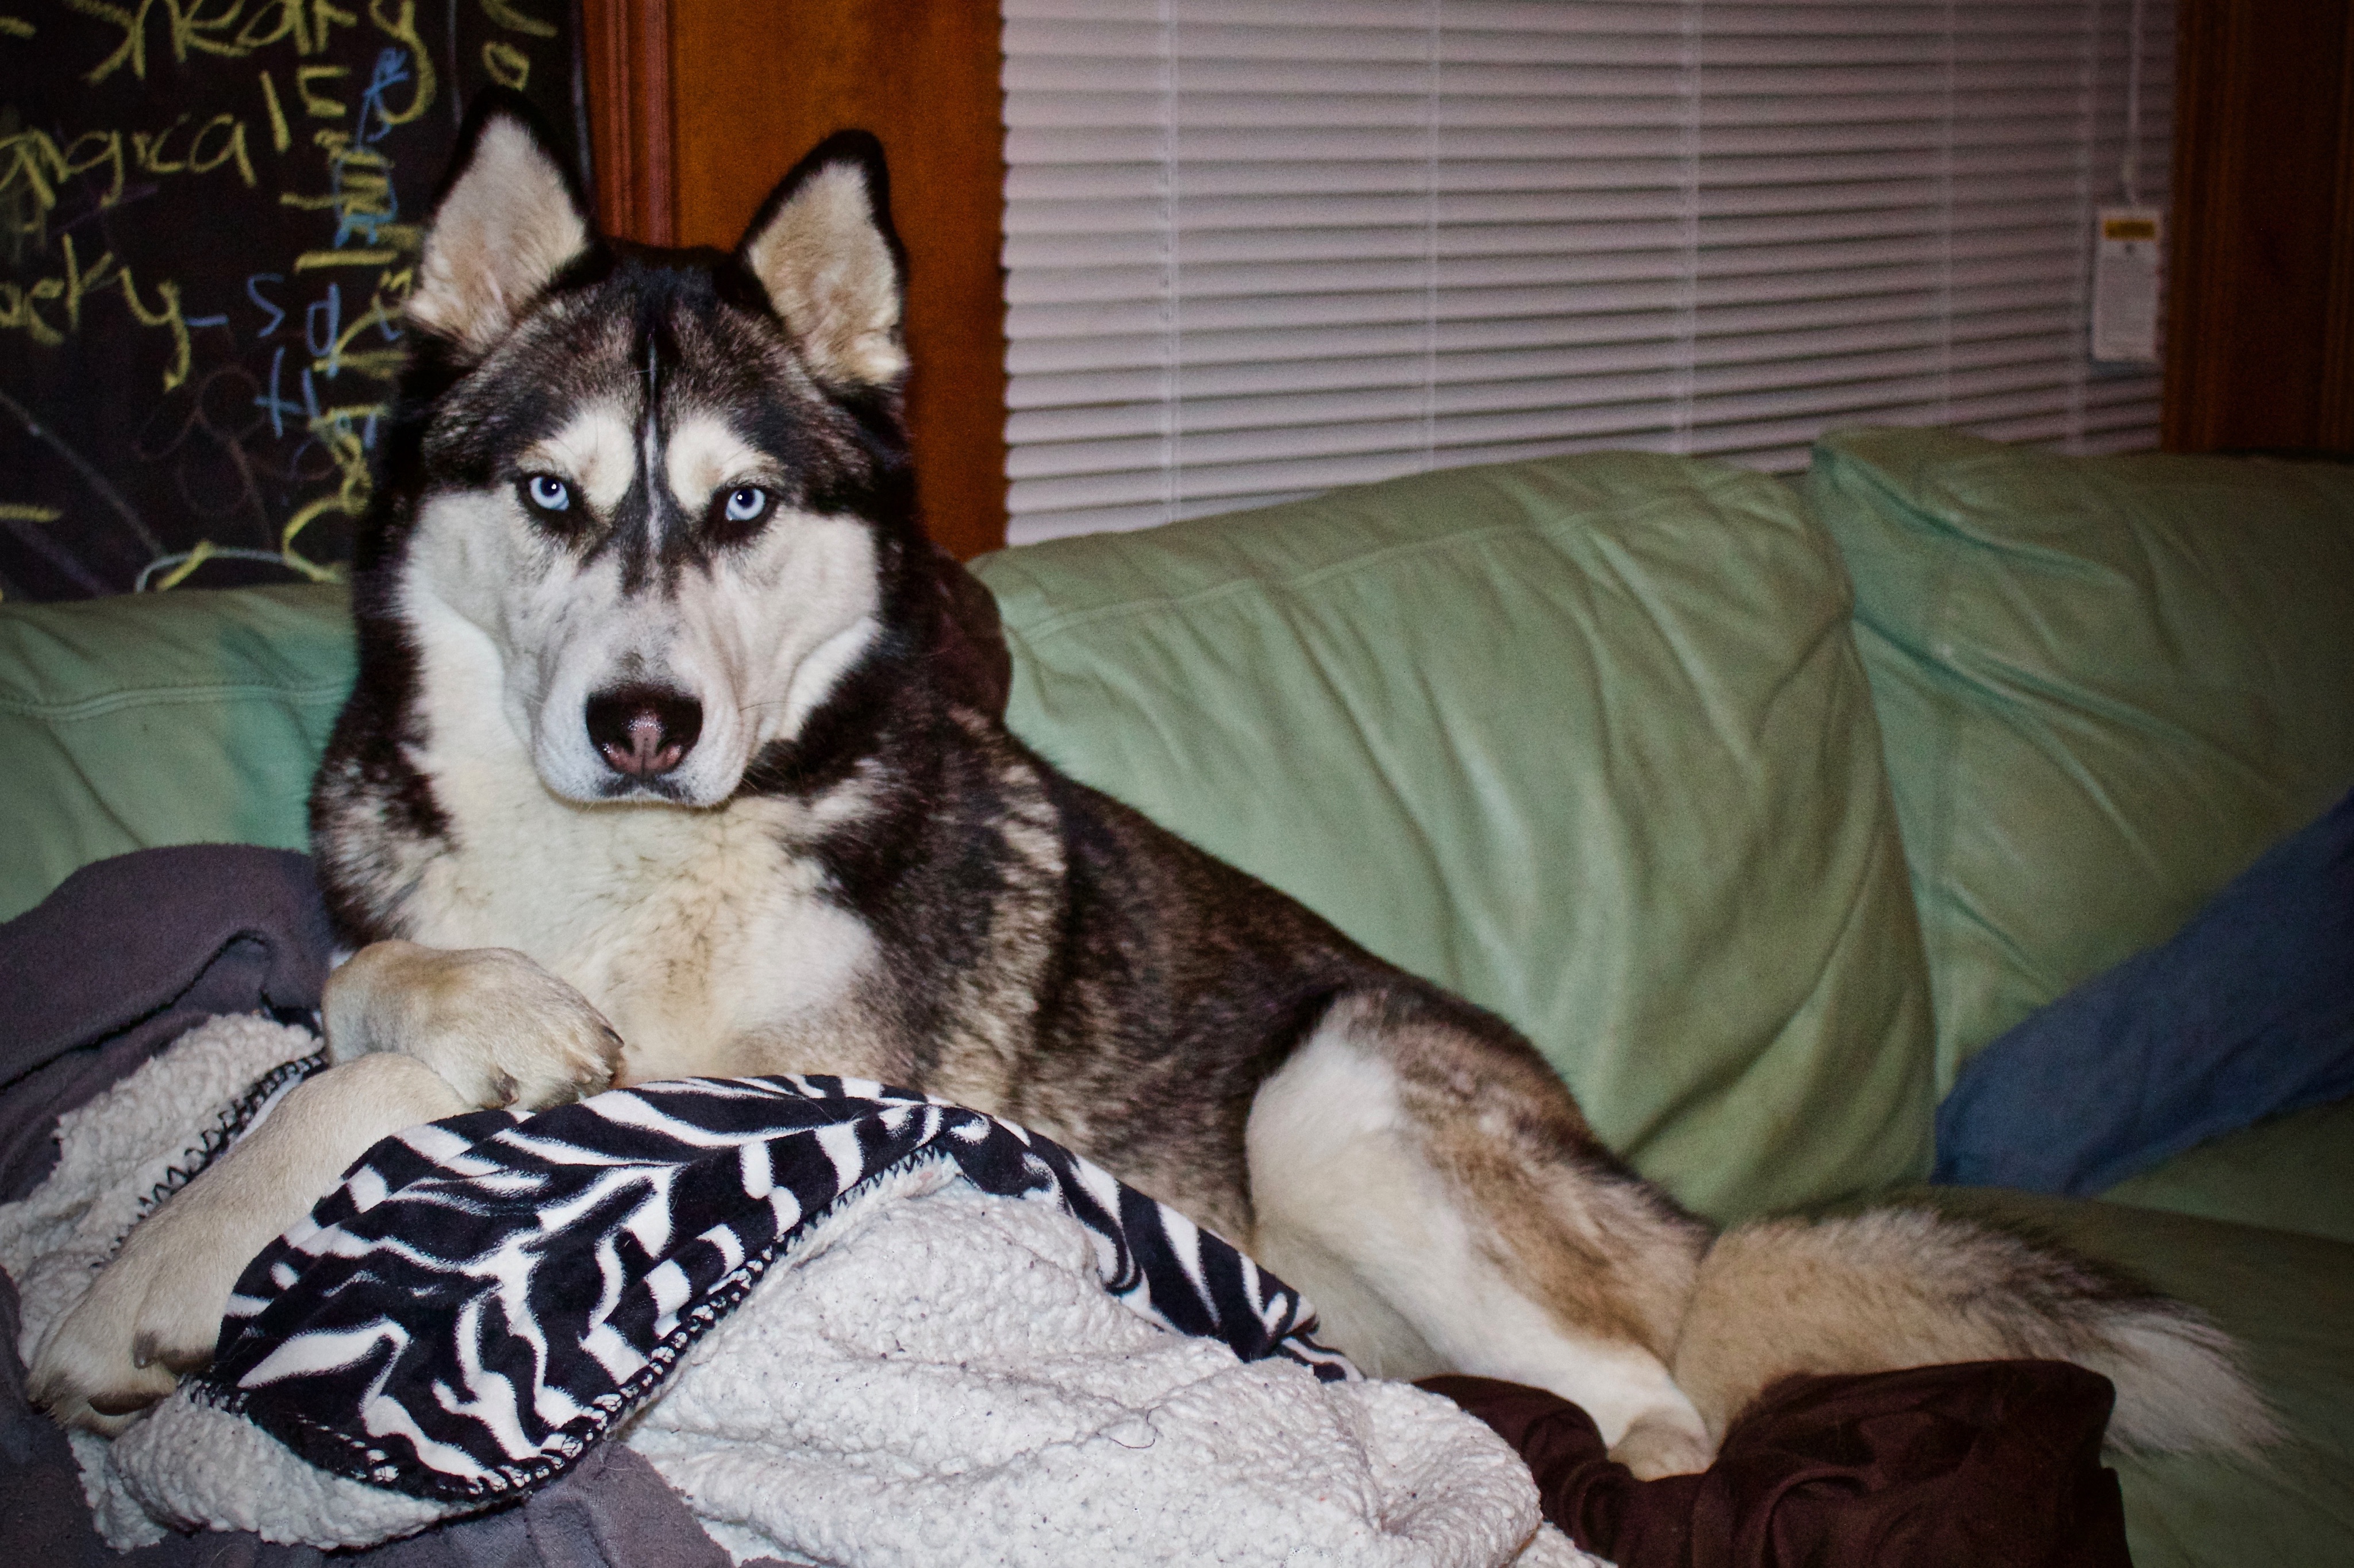 A black and white husky laying on a zebra and brown blanket on the arm rest of a mint green couch.